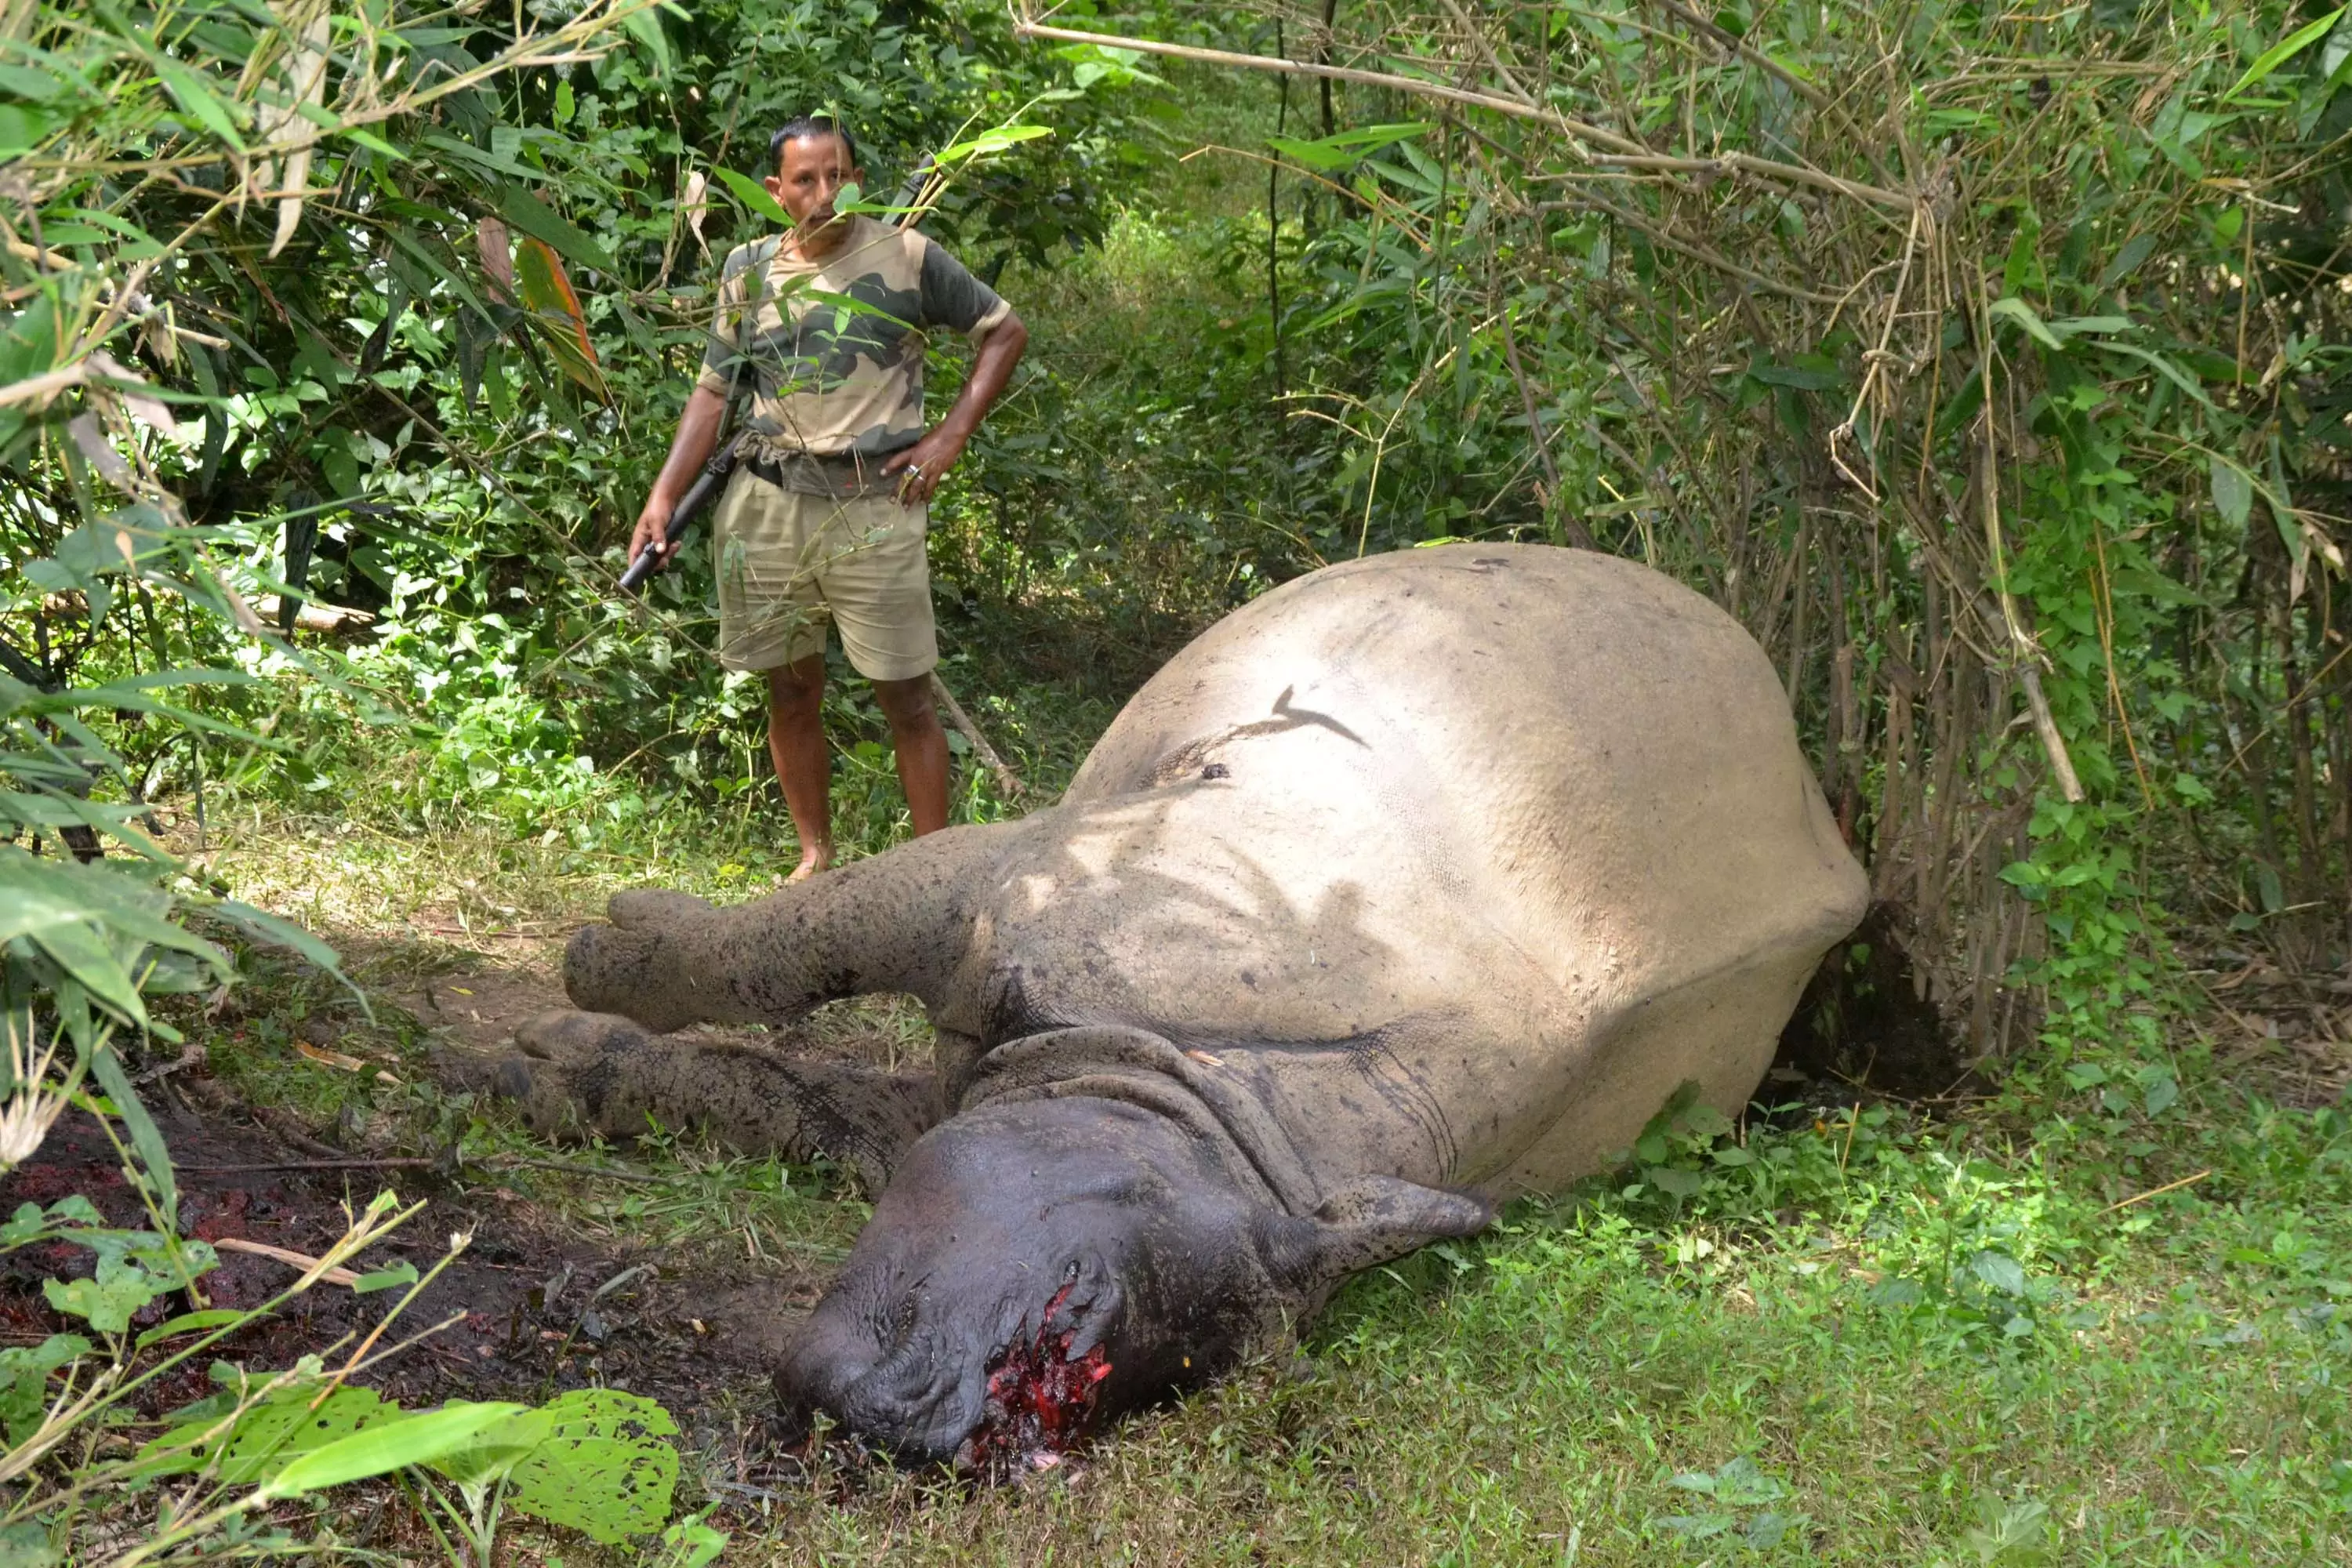 A one-horned rhinoceros which was killed and de-horned by poachers in the Burapahar range of Kaziranga.